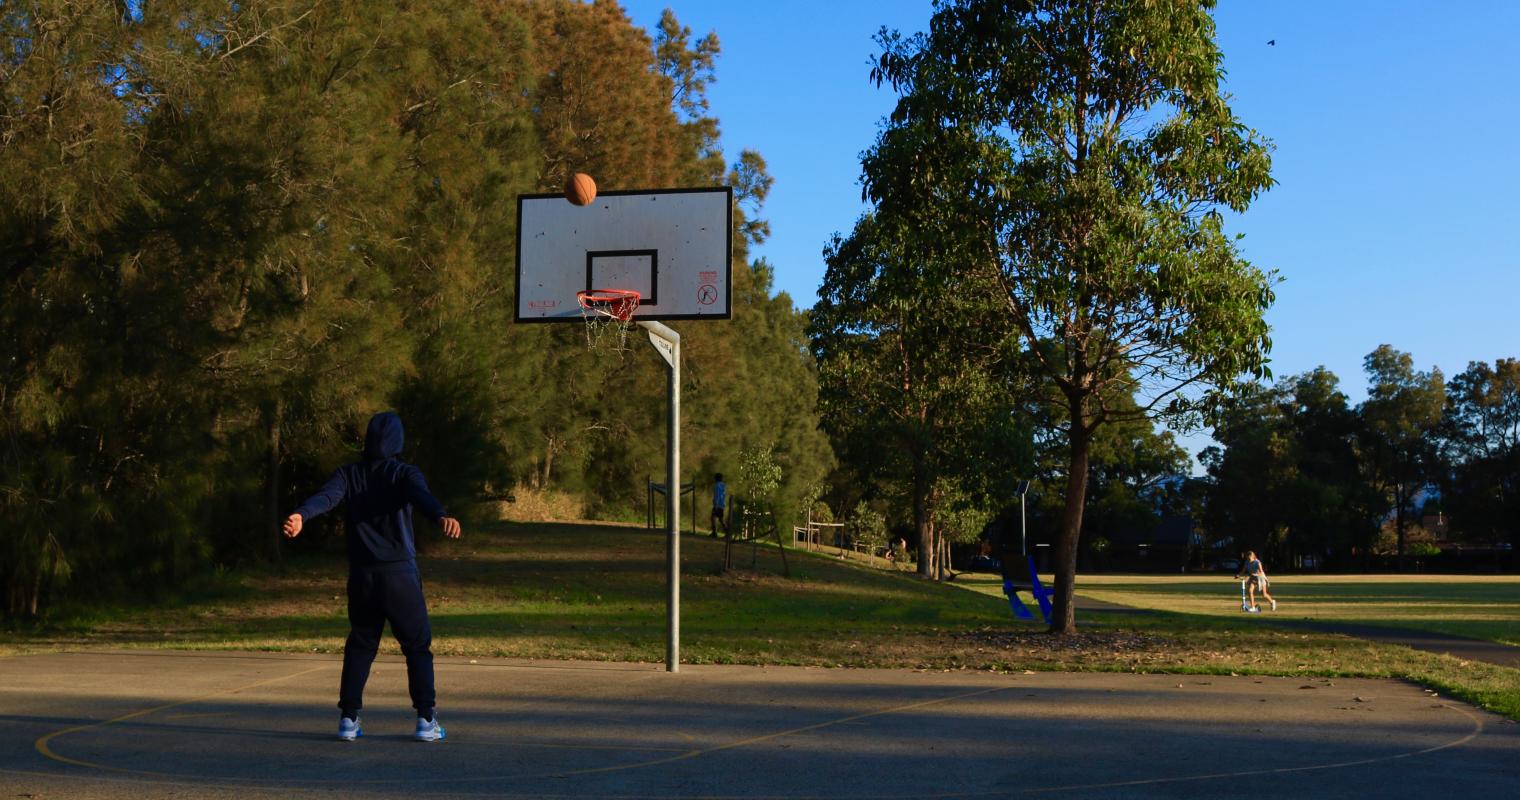 image of a person throwing a basketball into a hoop